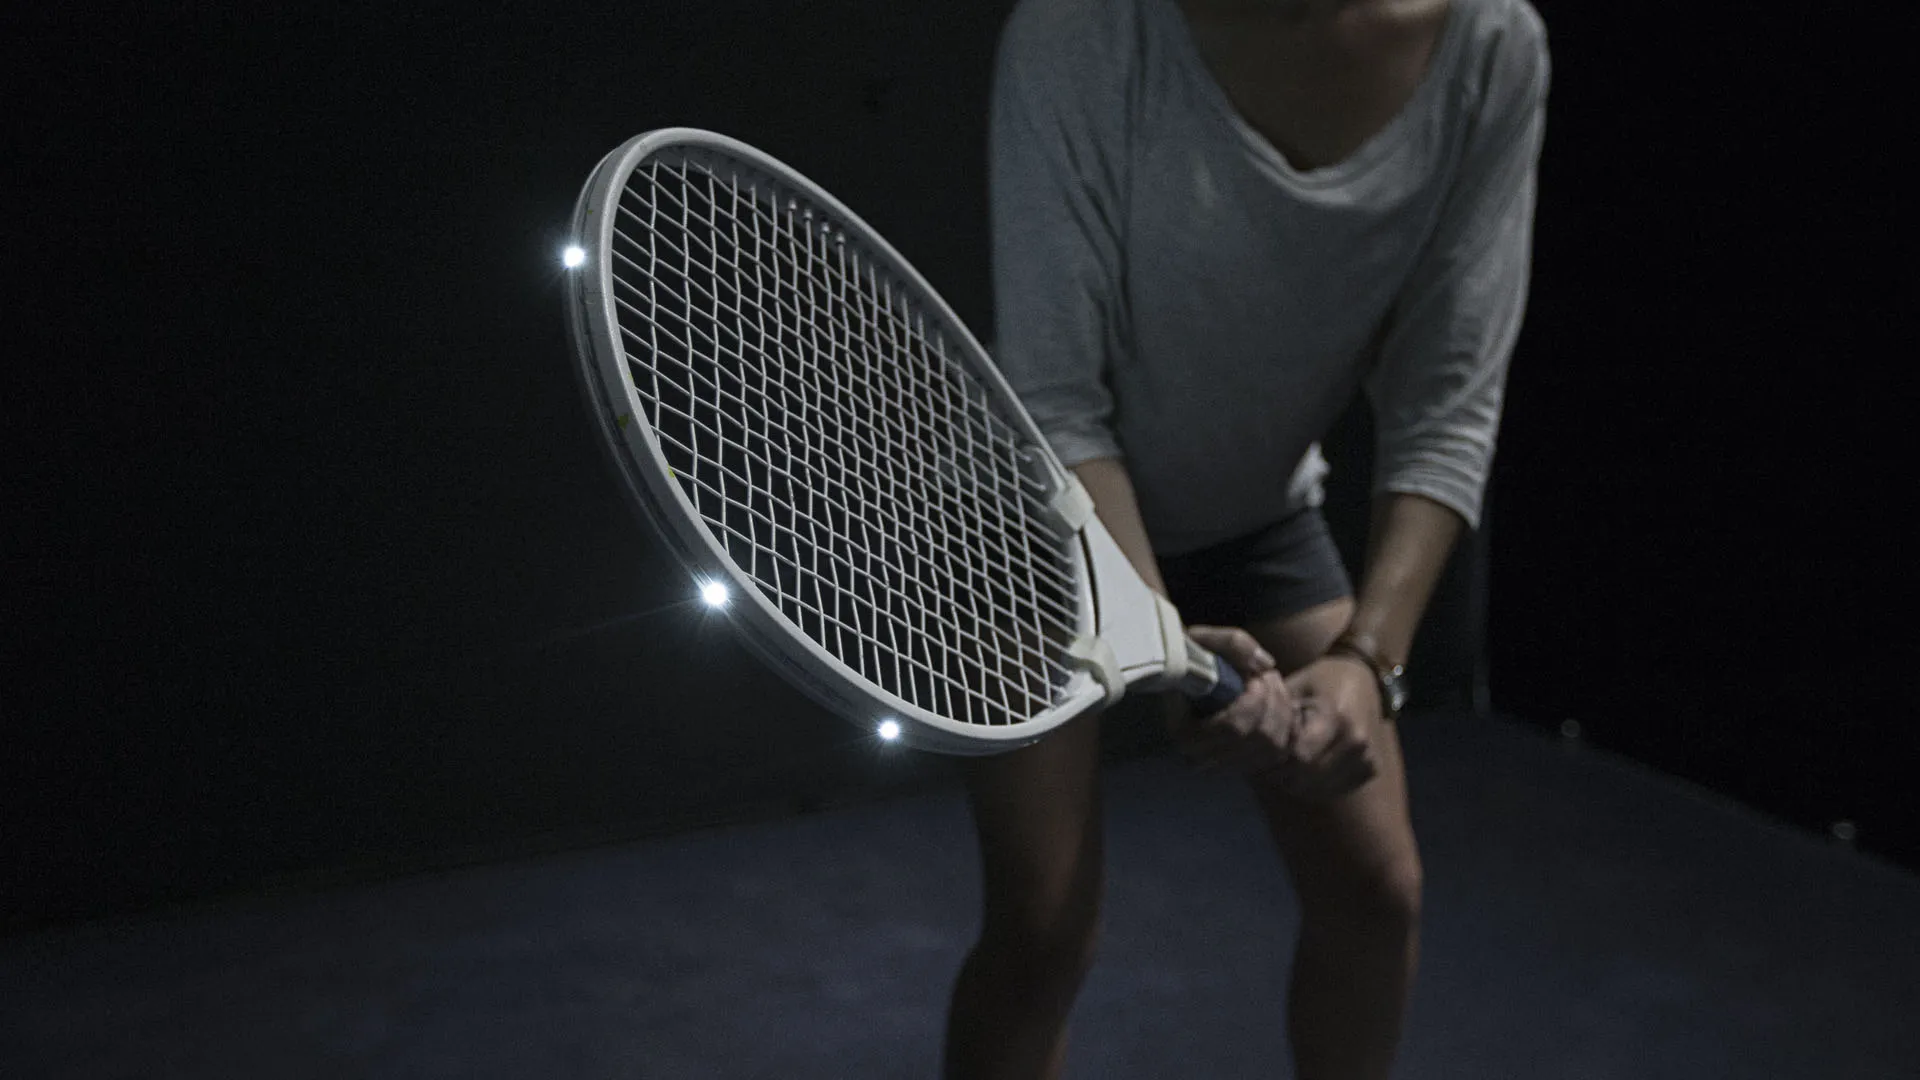 Art and Sound of Tennis - custom-built LED racquets enabled swing tracking